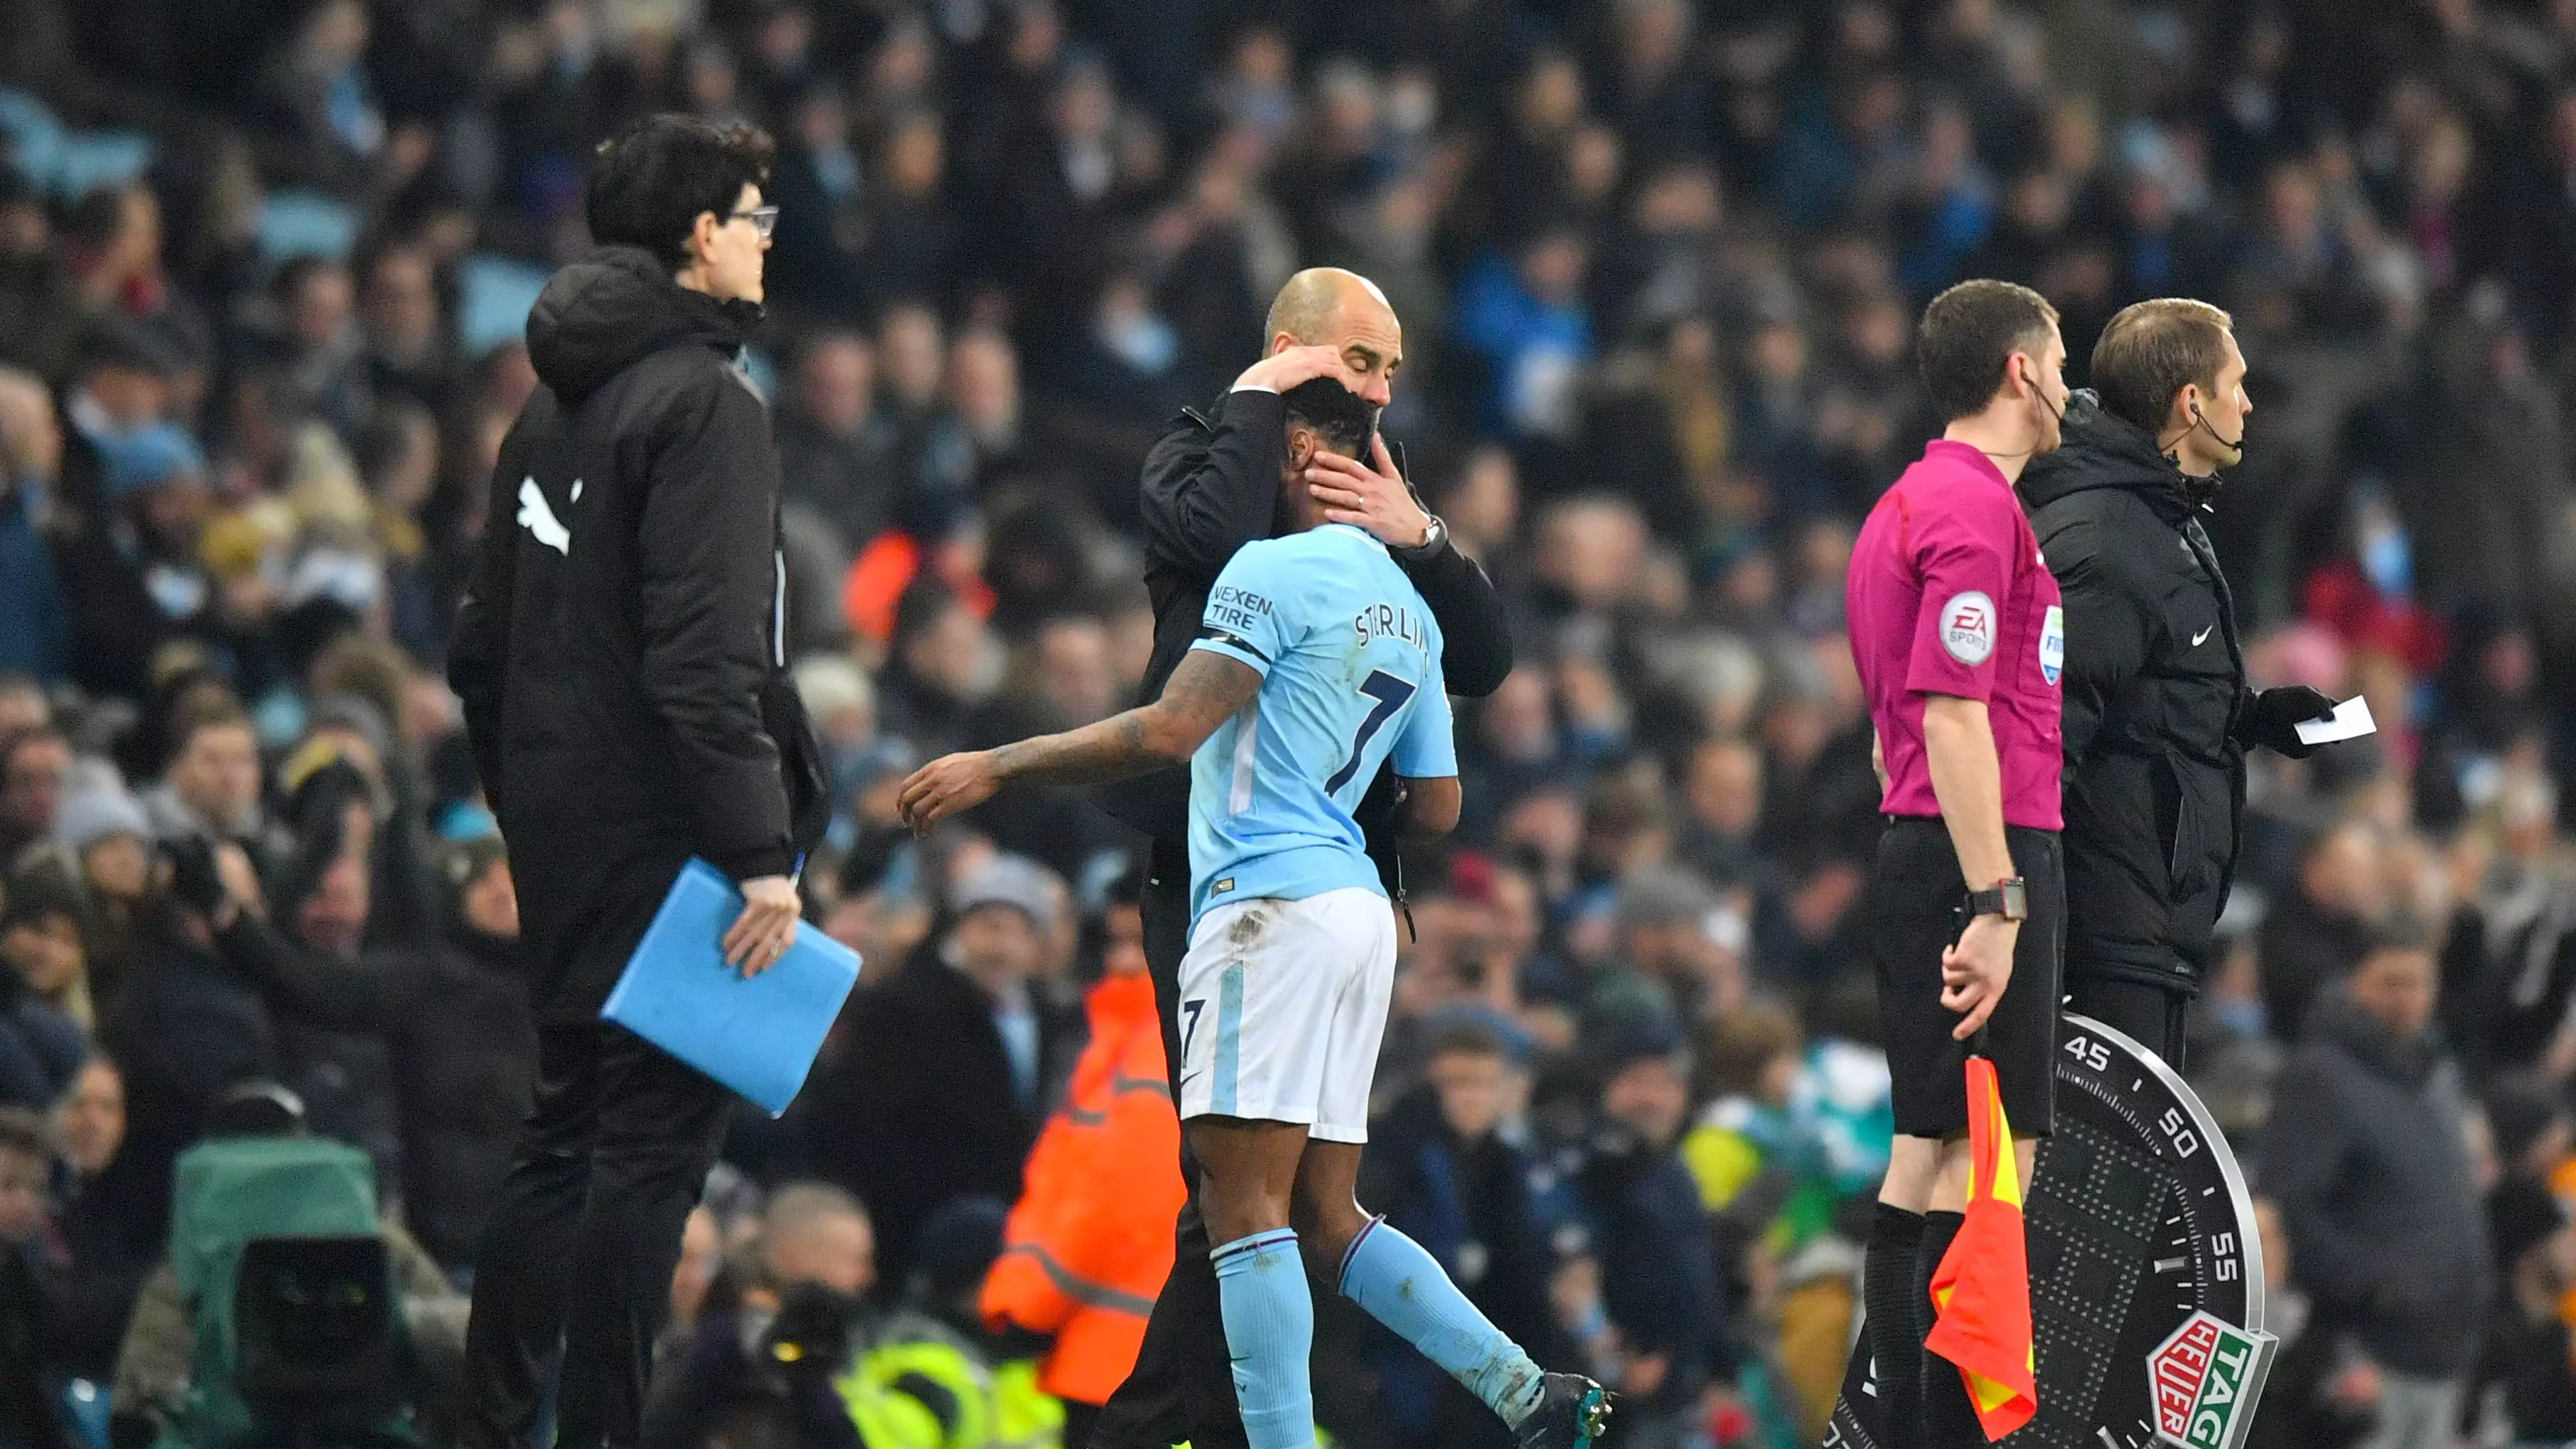 Fans Loved What Guardiola Did To Sterling After He Missed A Chance